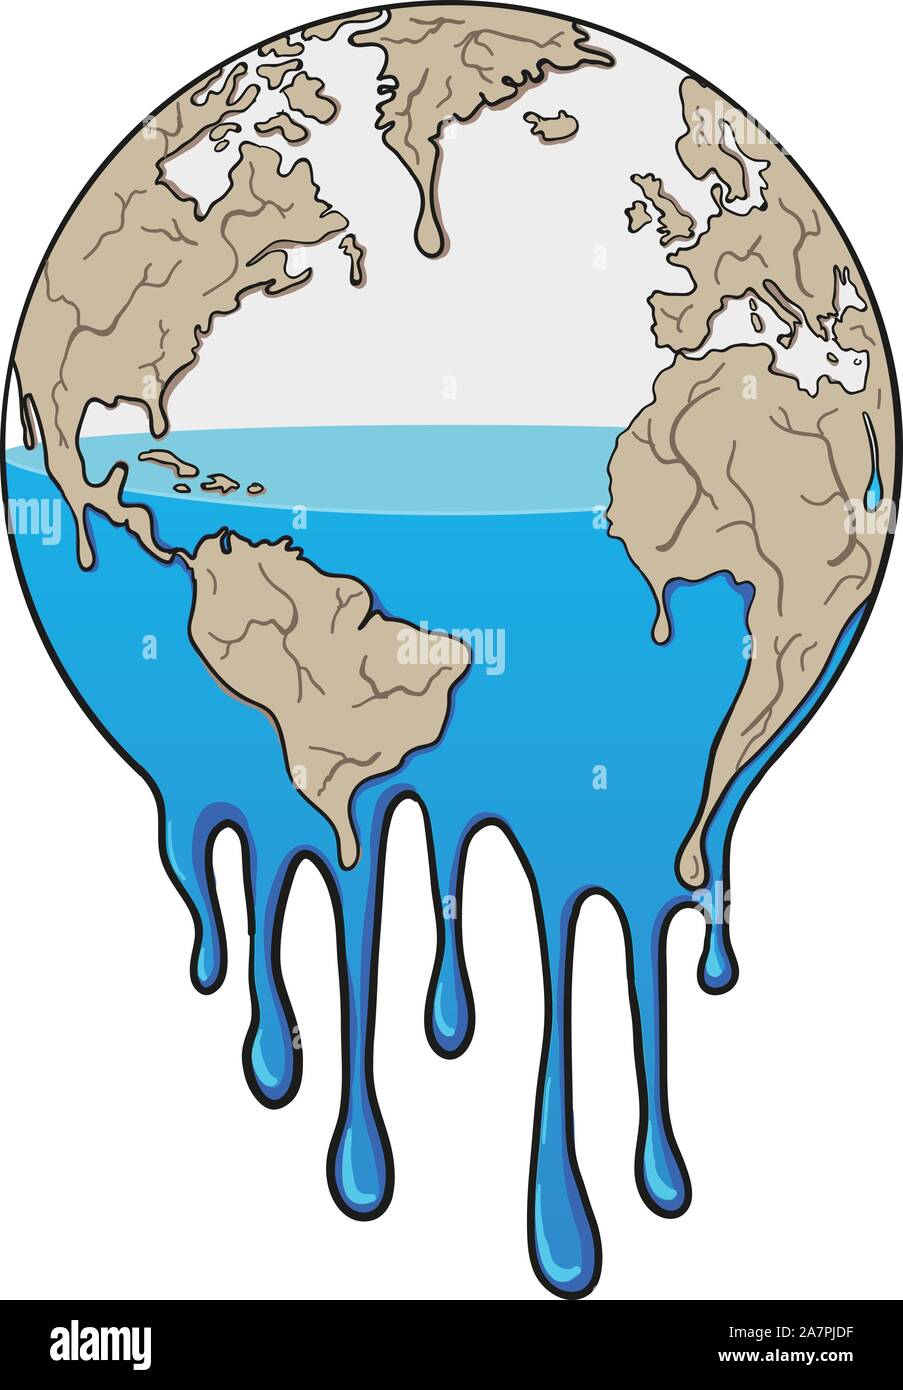 Global Warming and Drought Concept Illustration with Melting of Earth Stock Vector